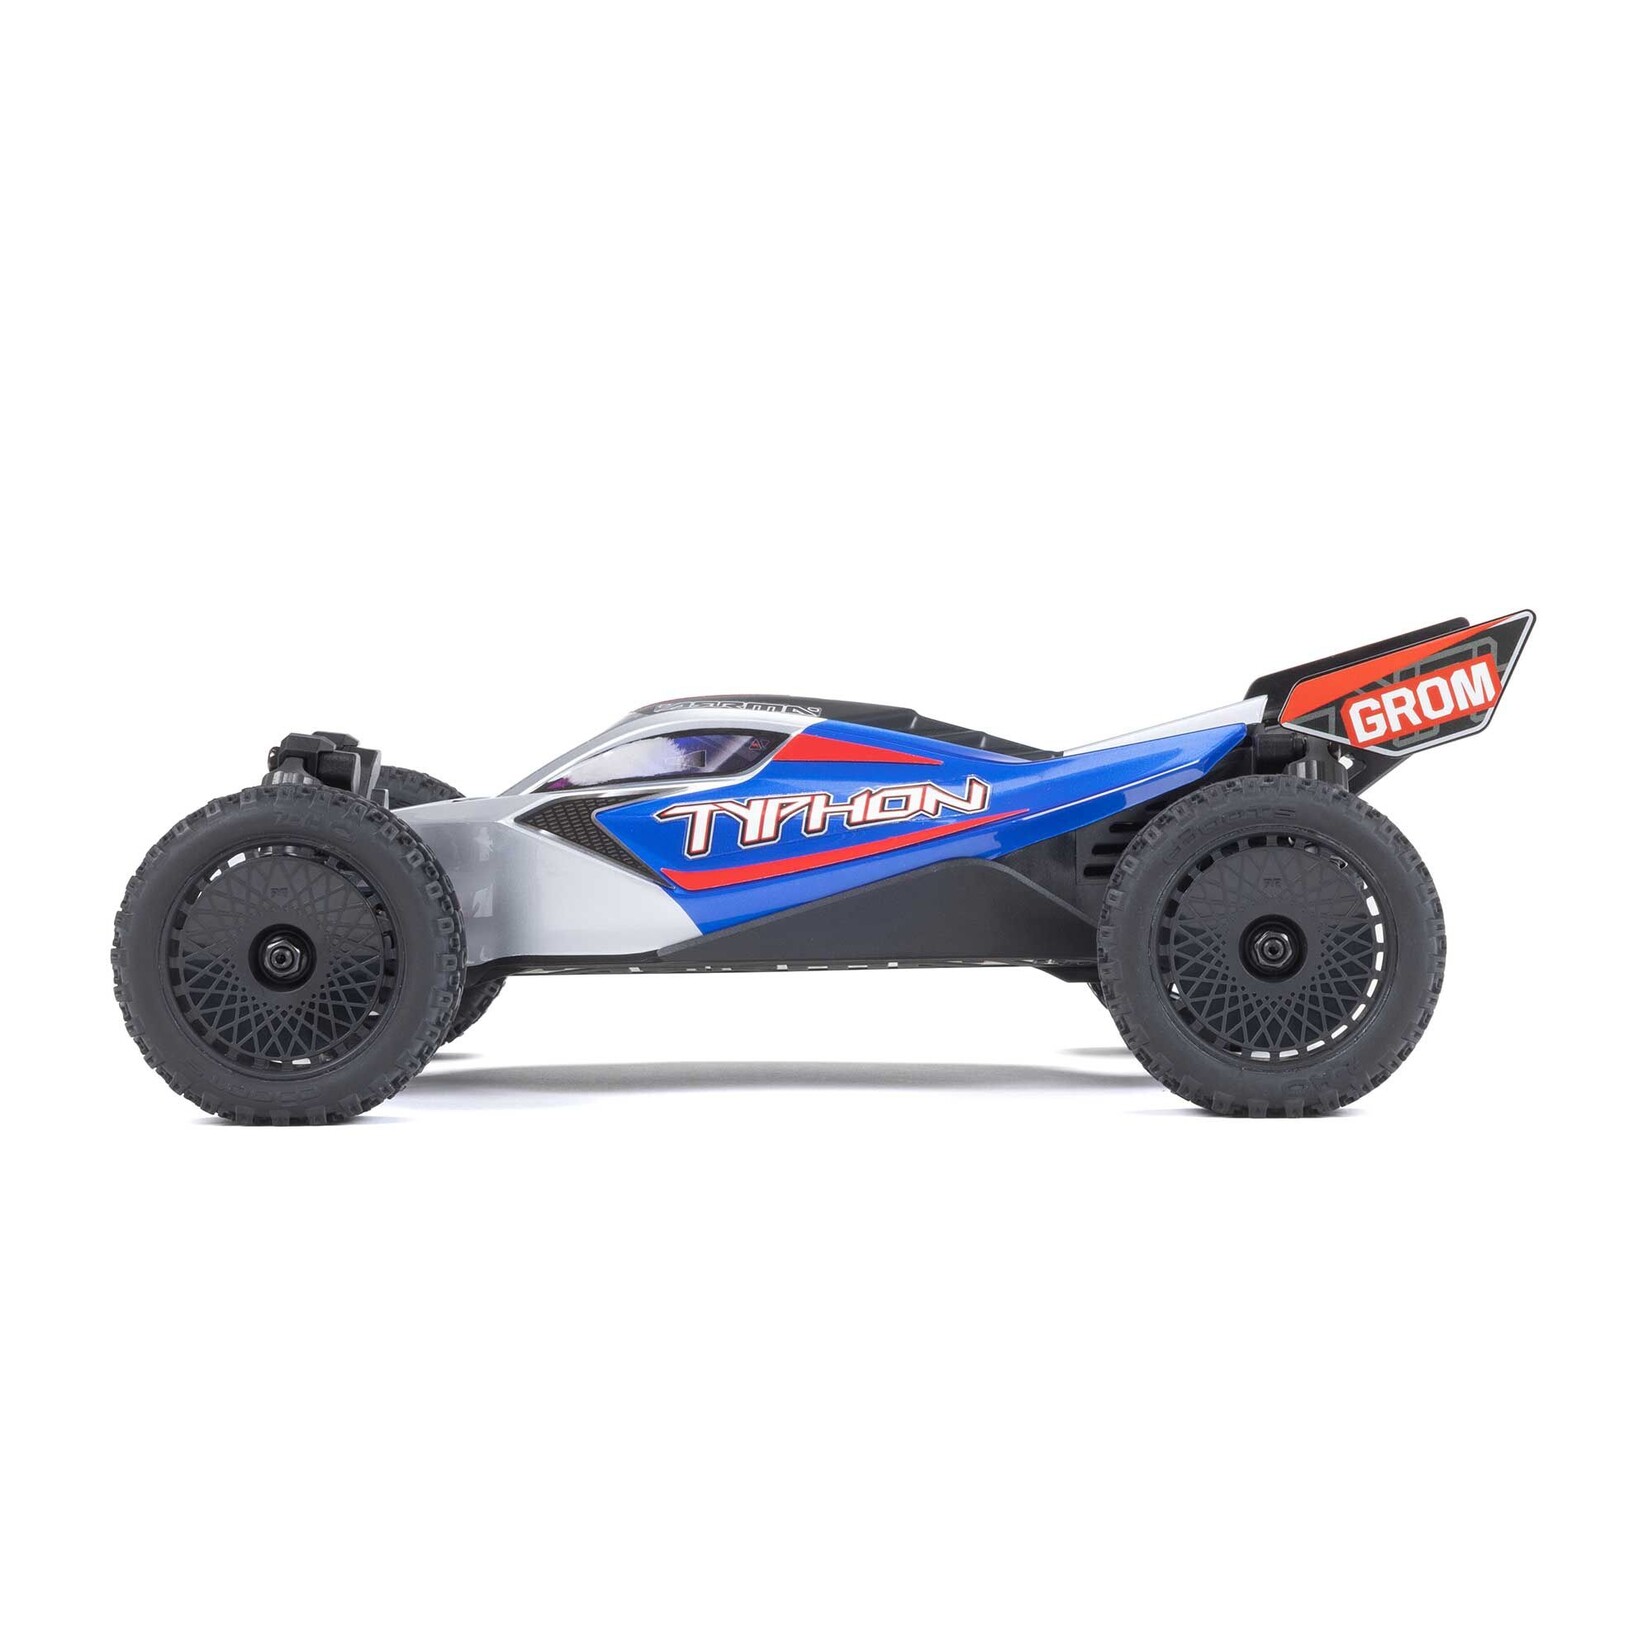 Arrma Typhon Grom 4X4 Smart Scale Buggy - Blue/Silver